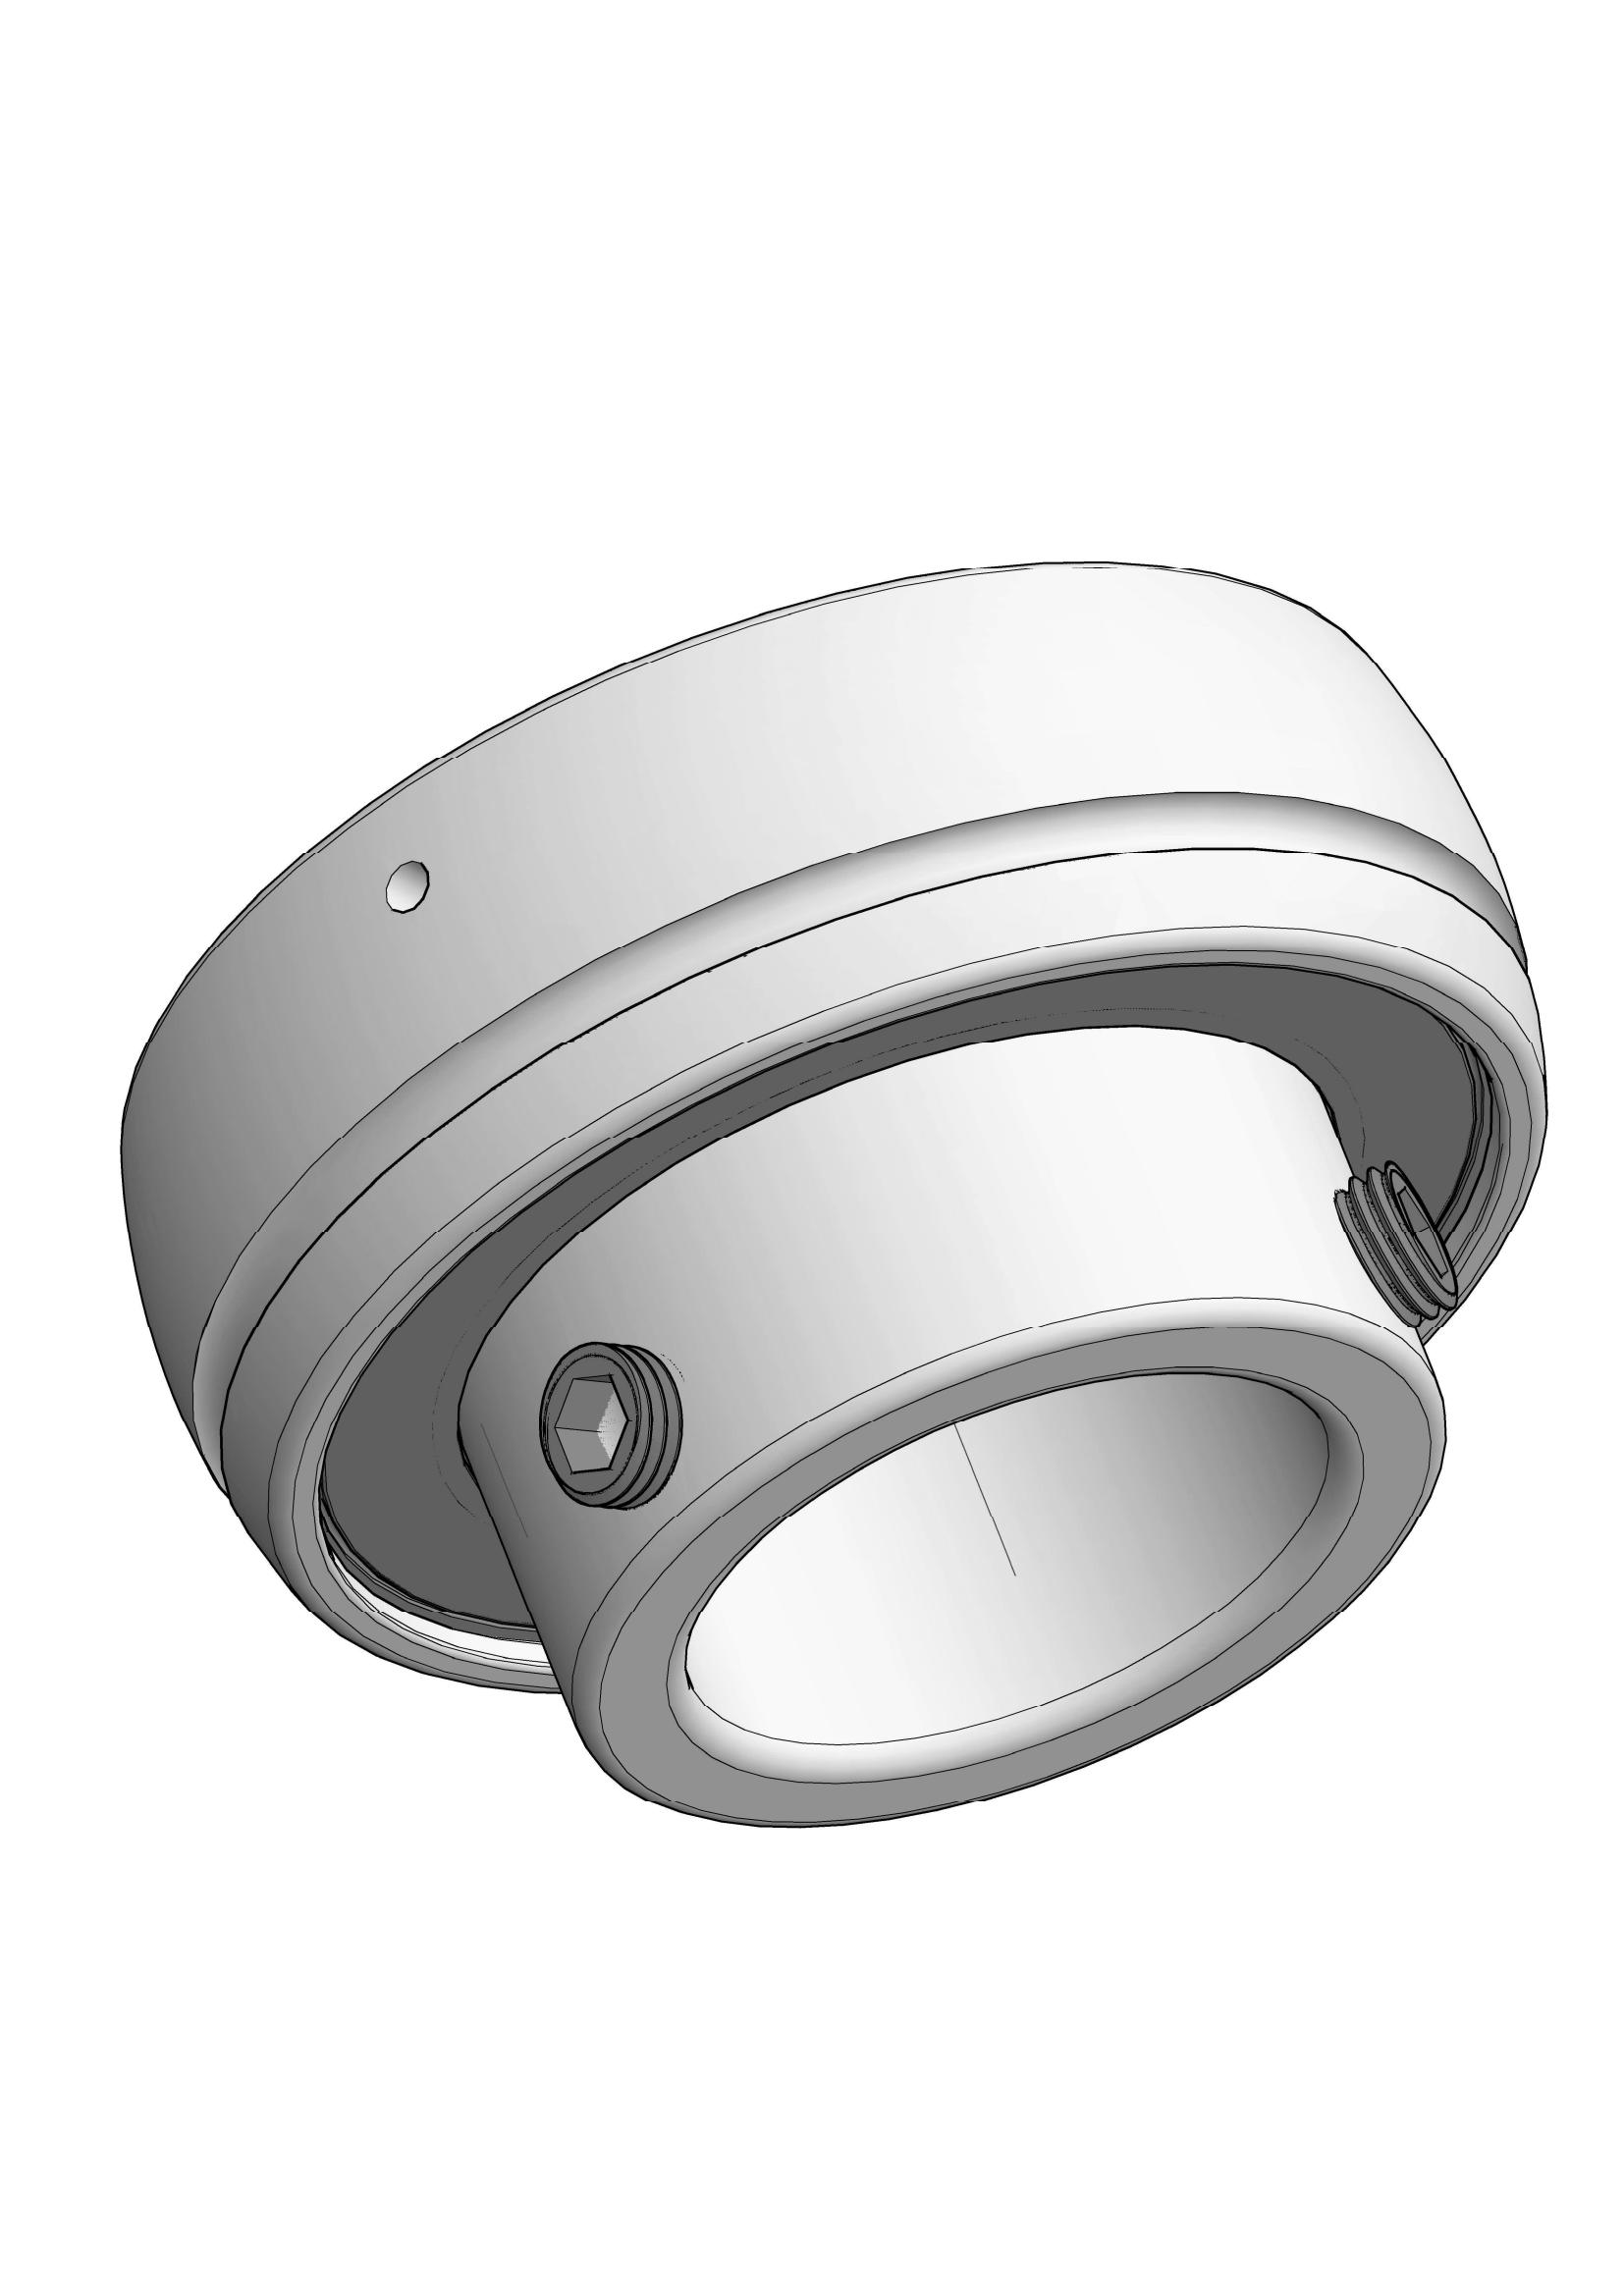 SB205-14 insert ball bearings with Eccentric Collar Lock with 7/8 inch Bore